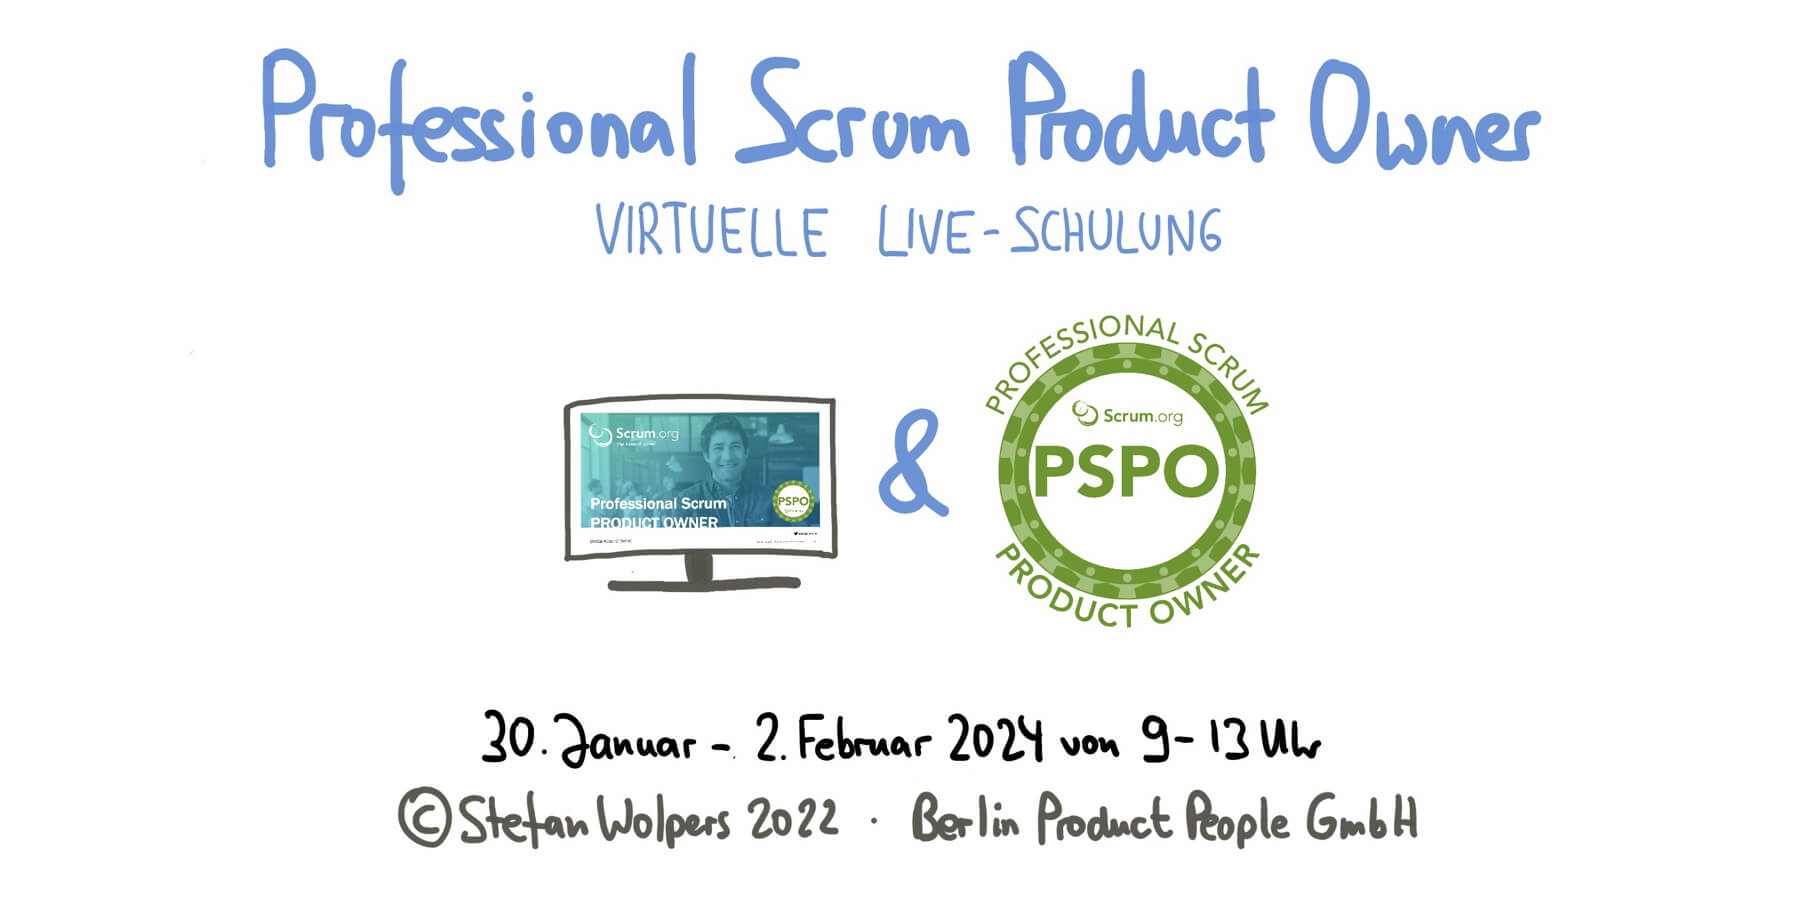 Professional Scrum Product Owner Training w/ PSPO I Certificate — January 30 - February 2, 2024 — Berlin-Product-People.com